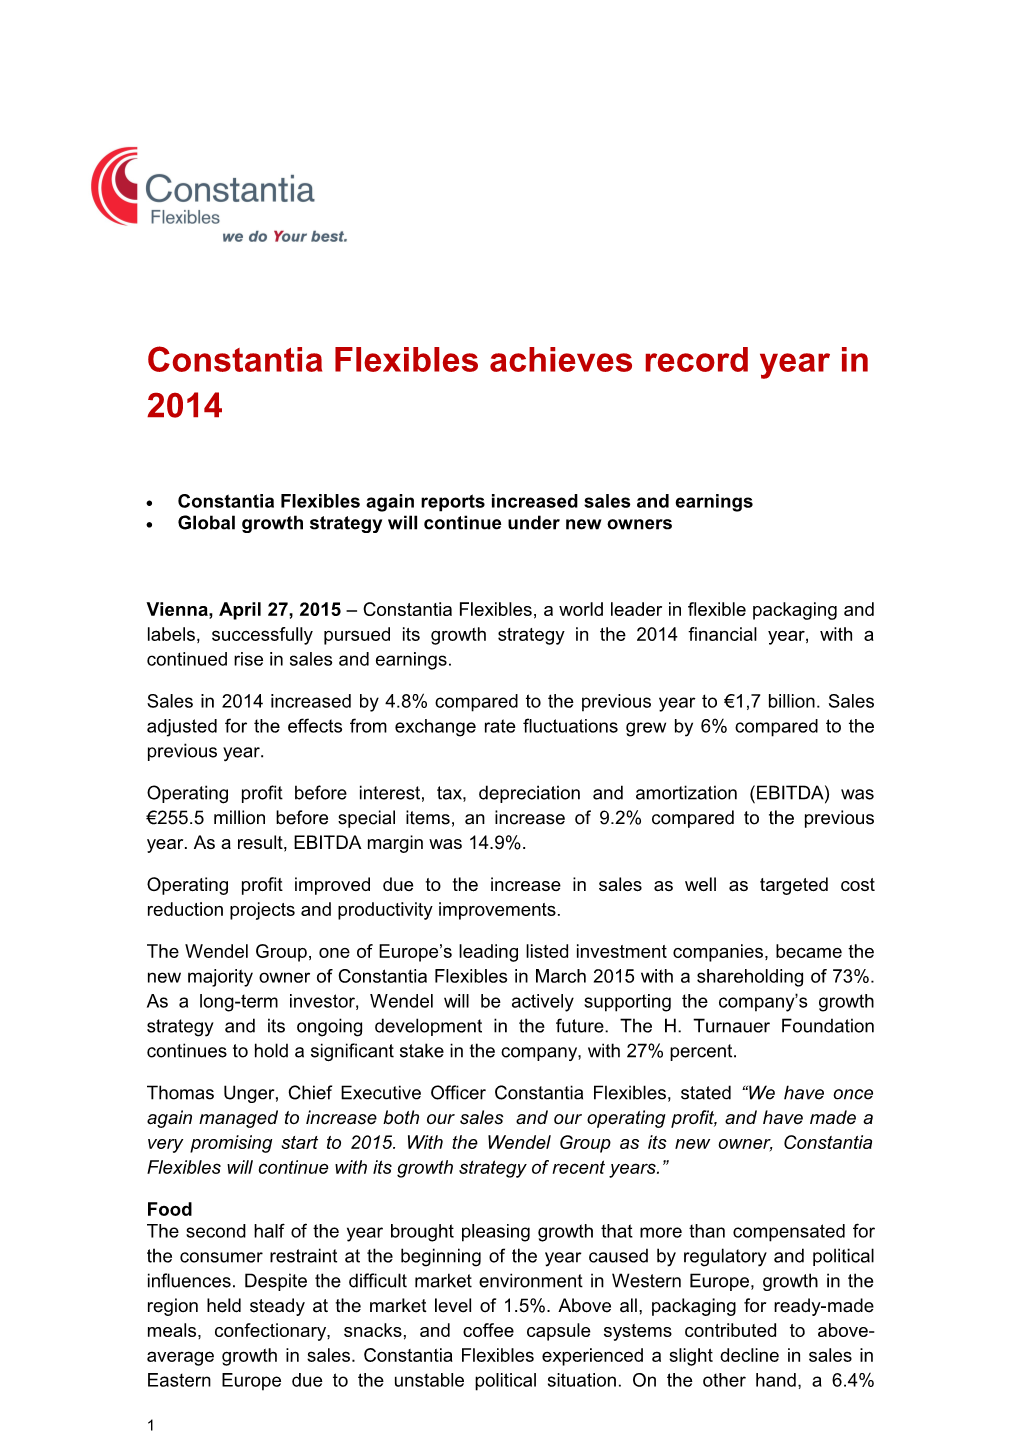 Constantia Flexibles Achieves Record Year in 2014